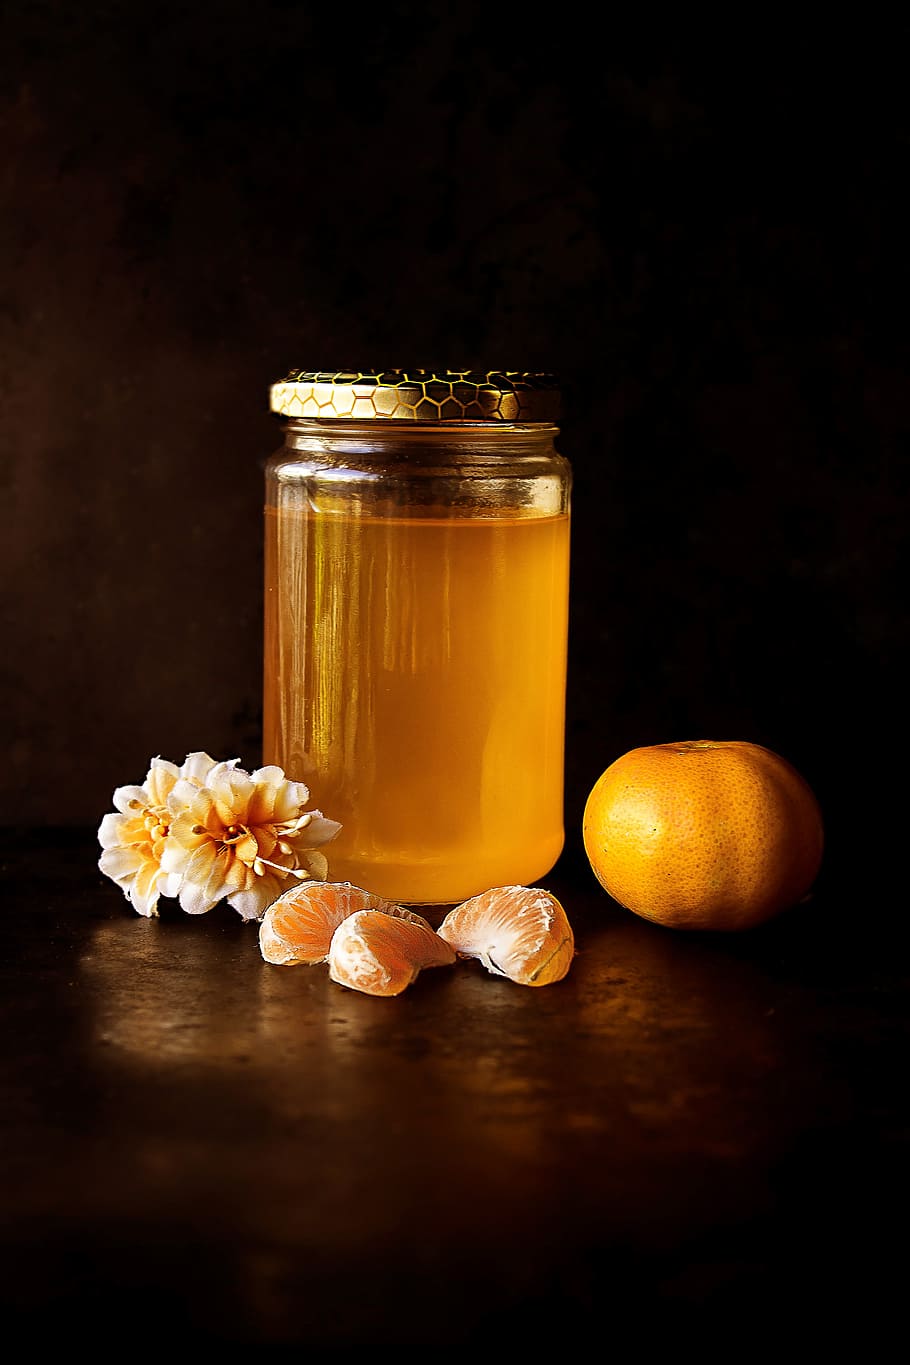 food, honey, orange, jar, flowers, reflection, styling, photography, food and drink, container